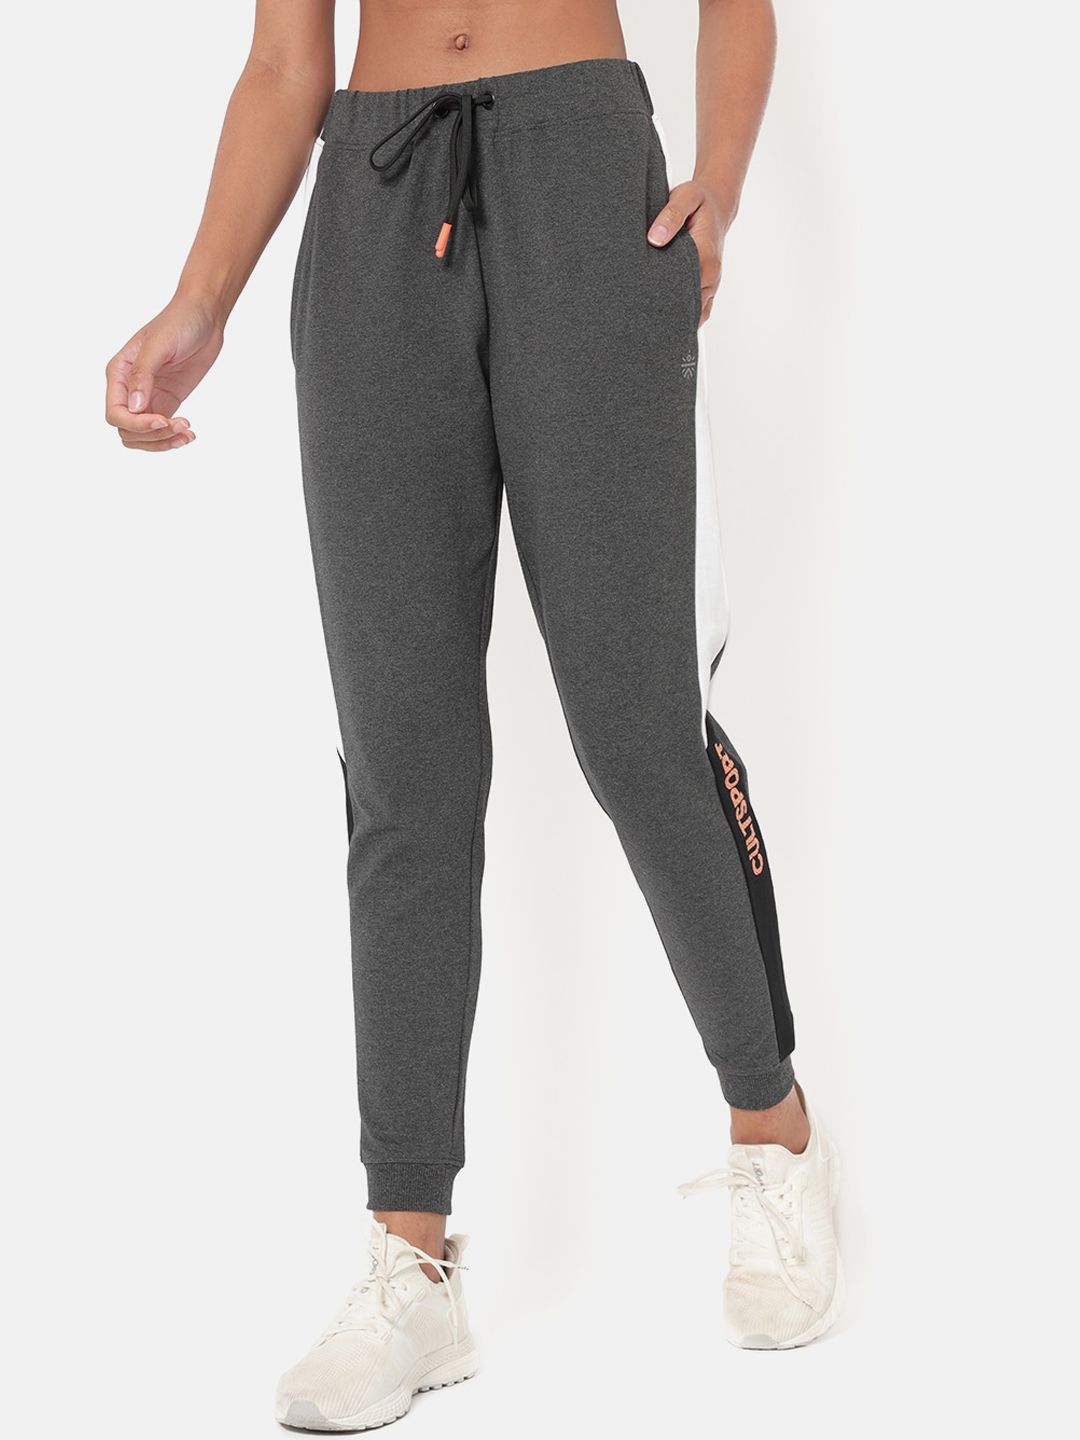 Cultsport Women Grey Melange Solid Antimicrobial Joggers Price in India